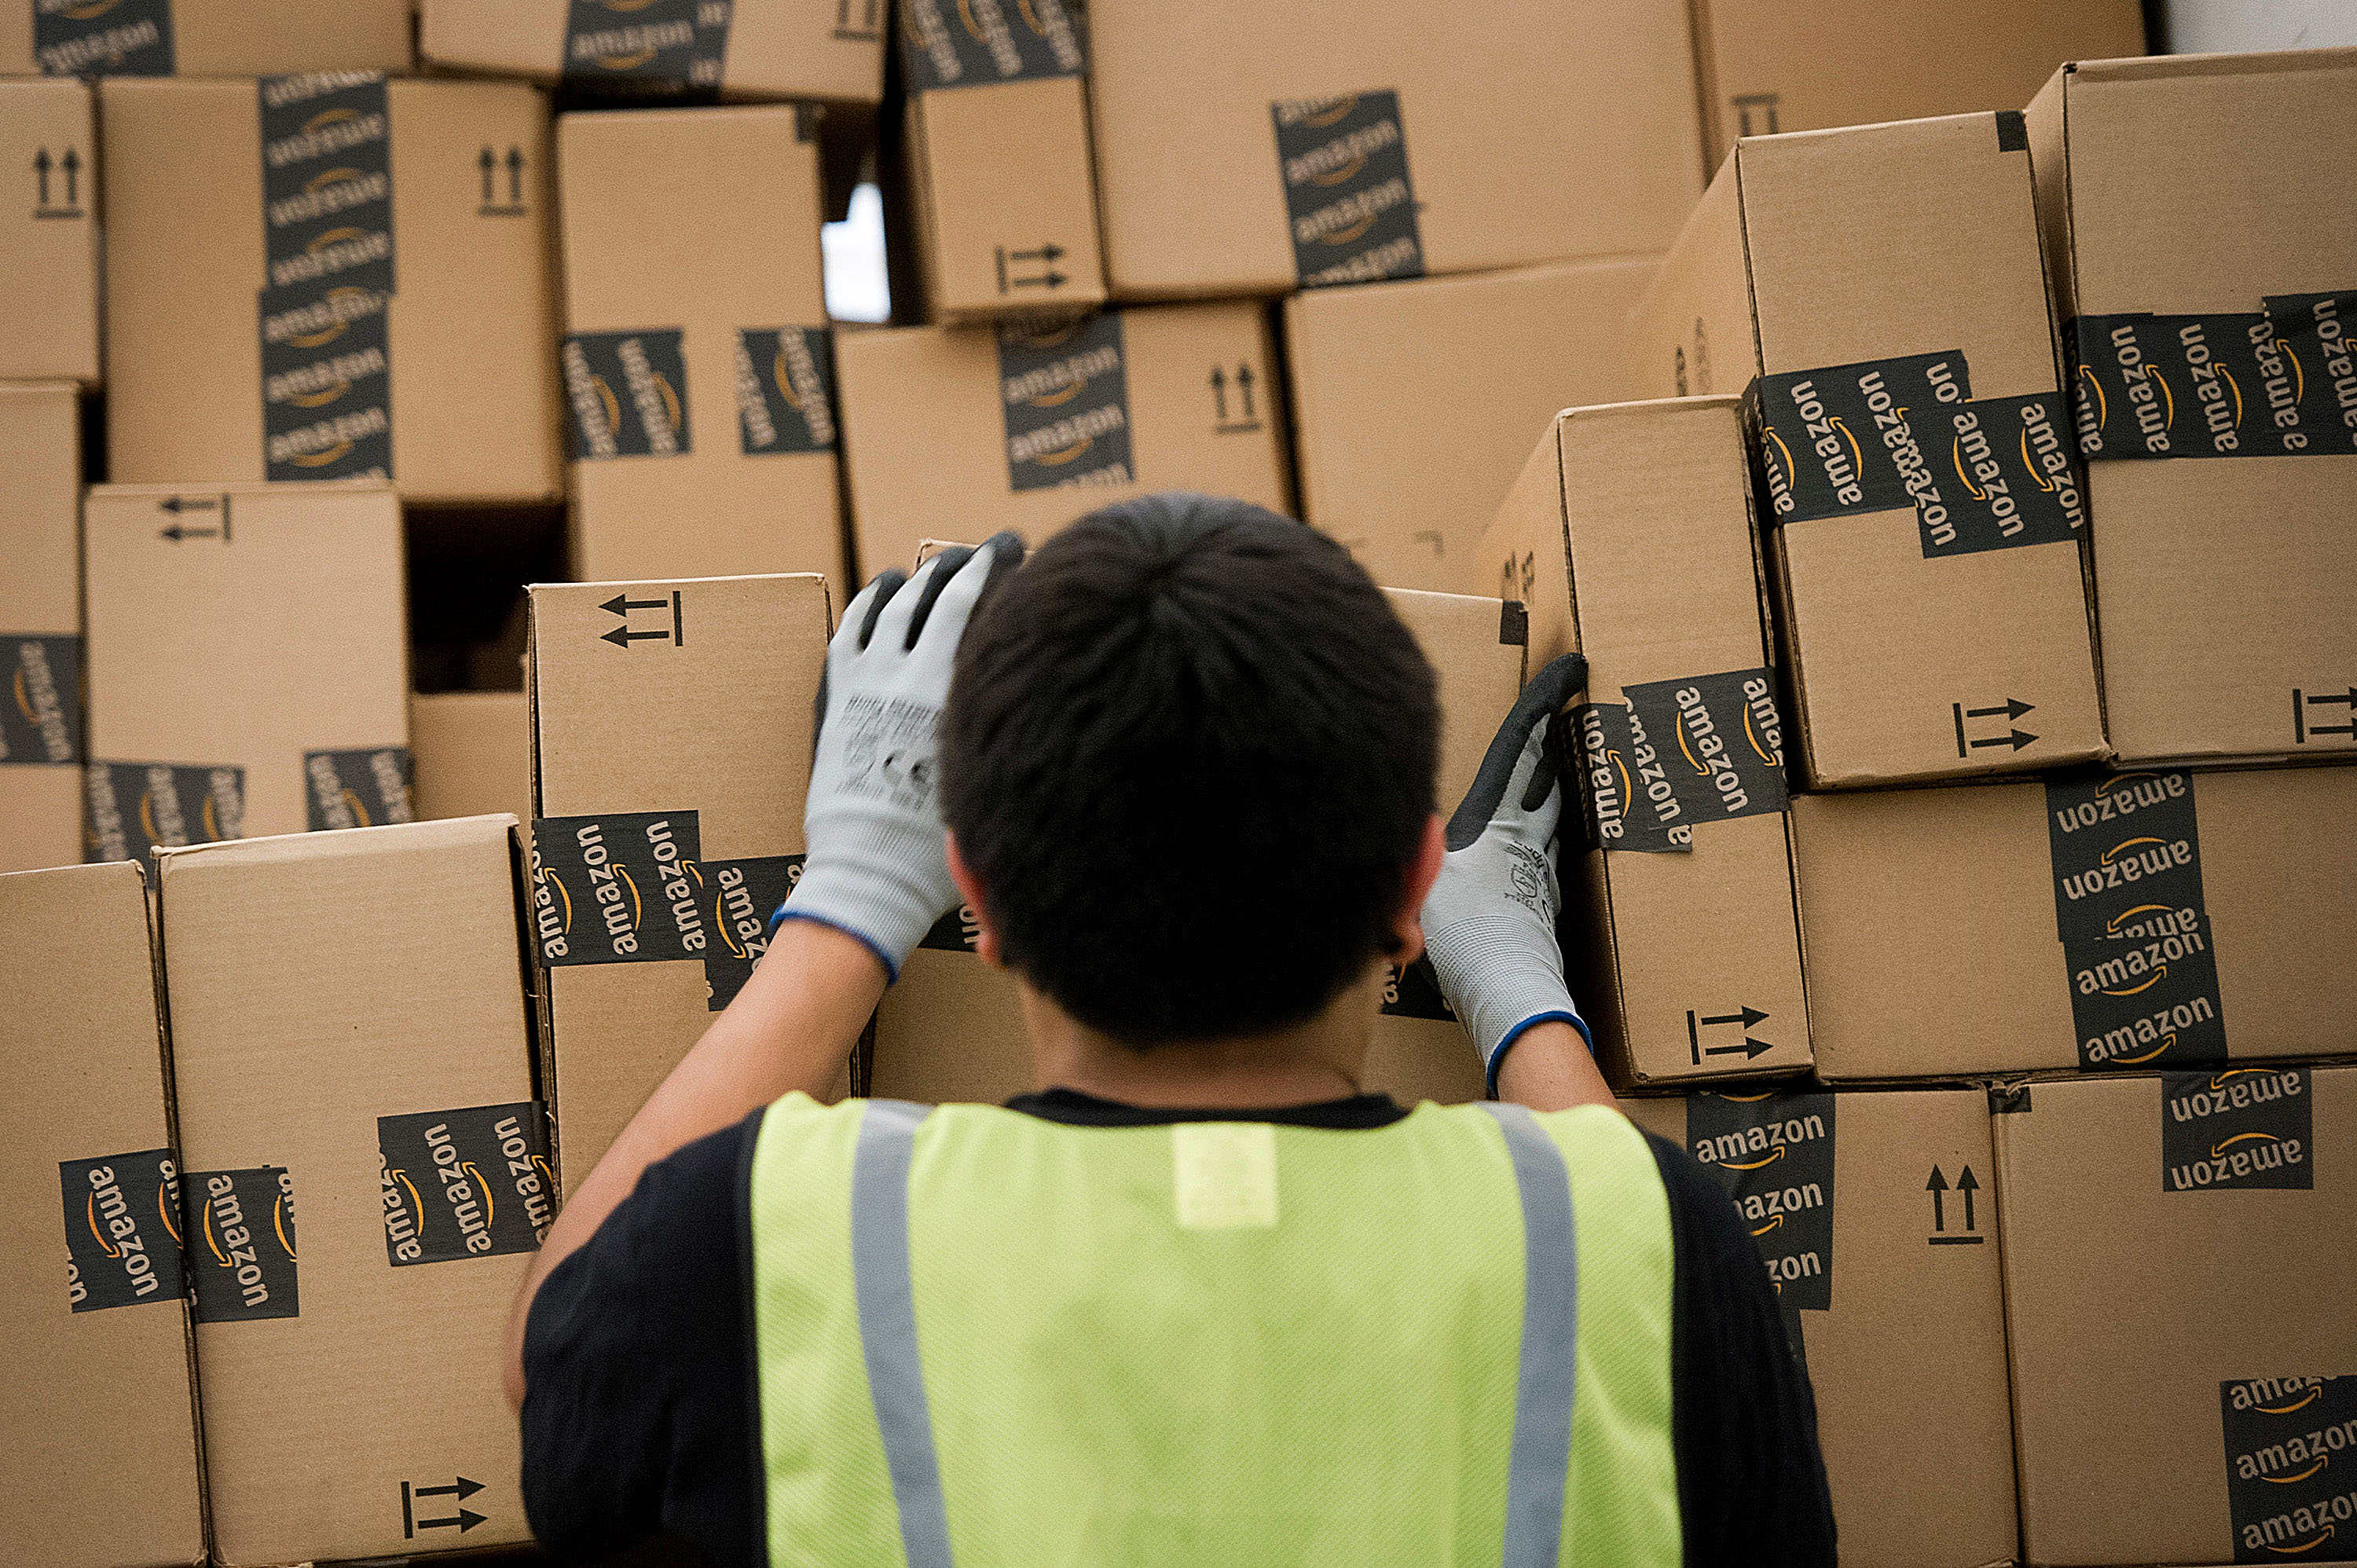 An employee loads a truck with boxes to be shipped at the Amazon.com Inc. distribution center. (Bloomberg/Getty Images)